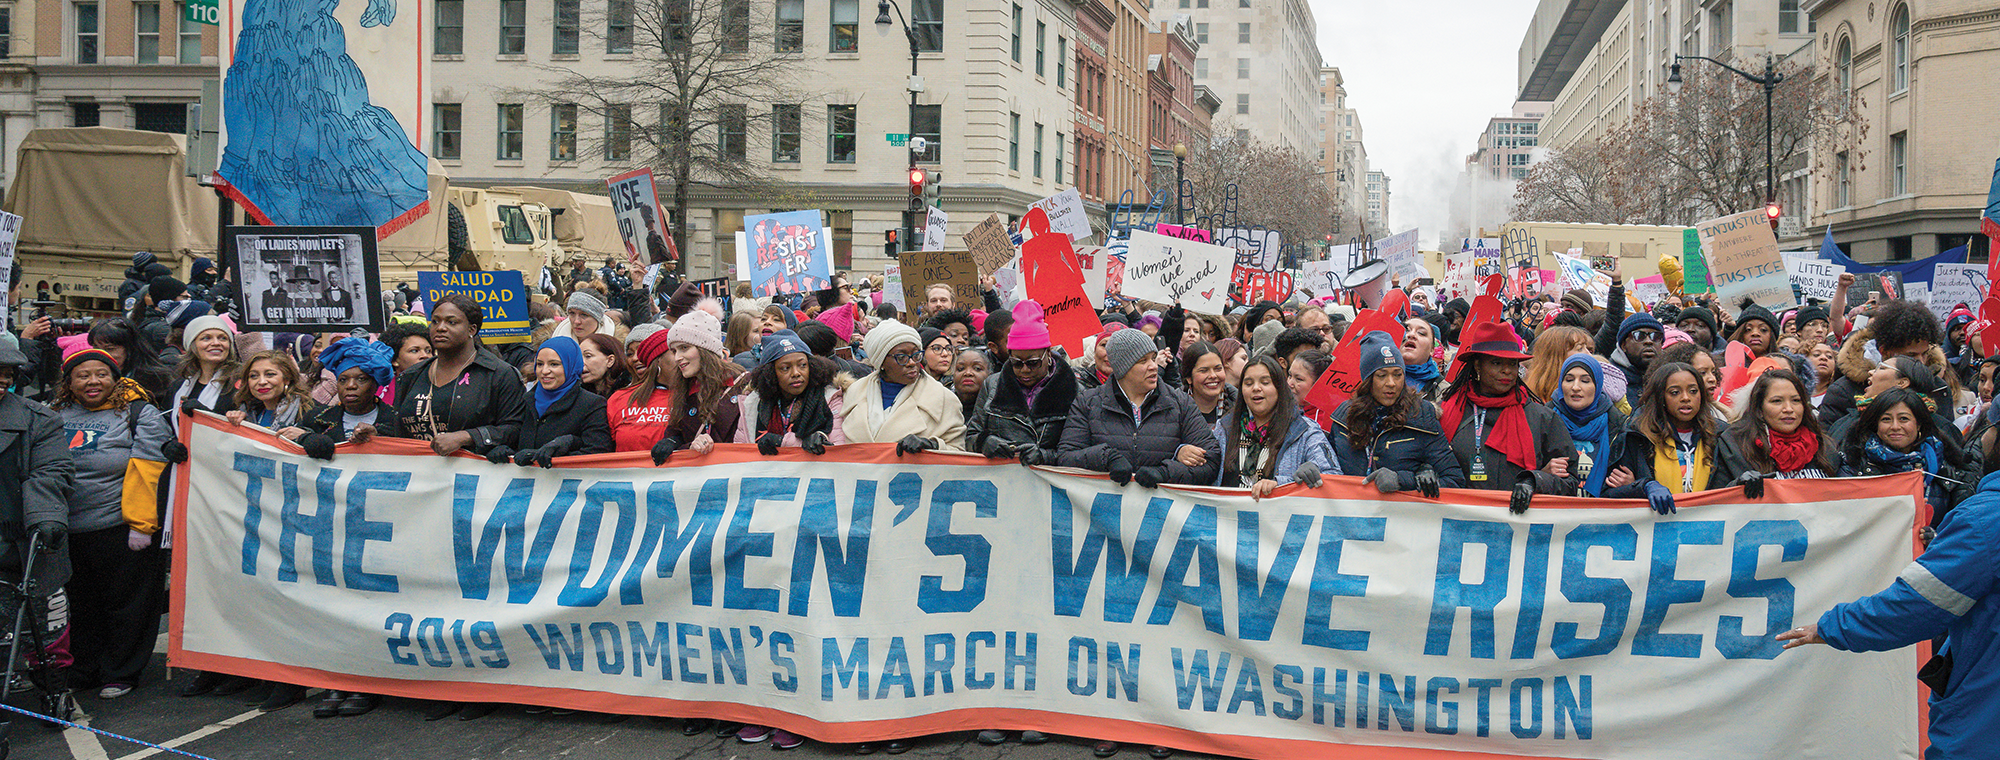 Marchers carrying the 'women's wave' sign at the 2019 Women's March, Washington, DC. Image: Mobilus In Mobili, Flickr